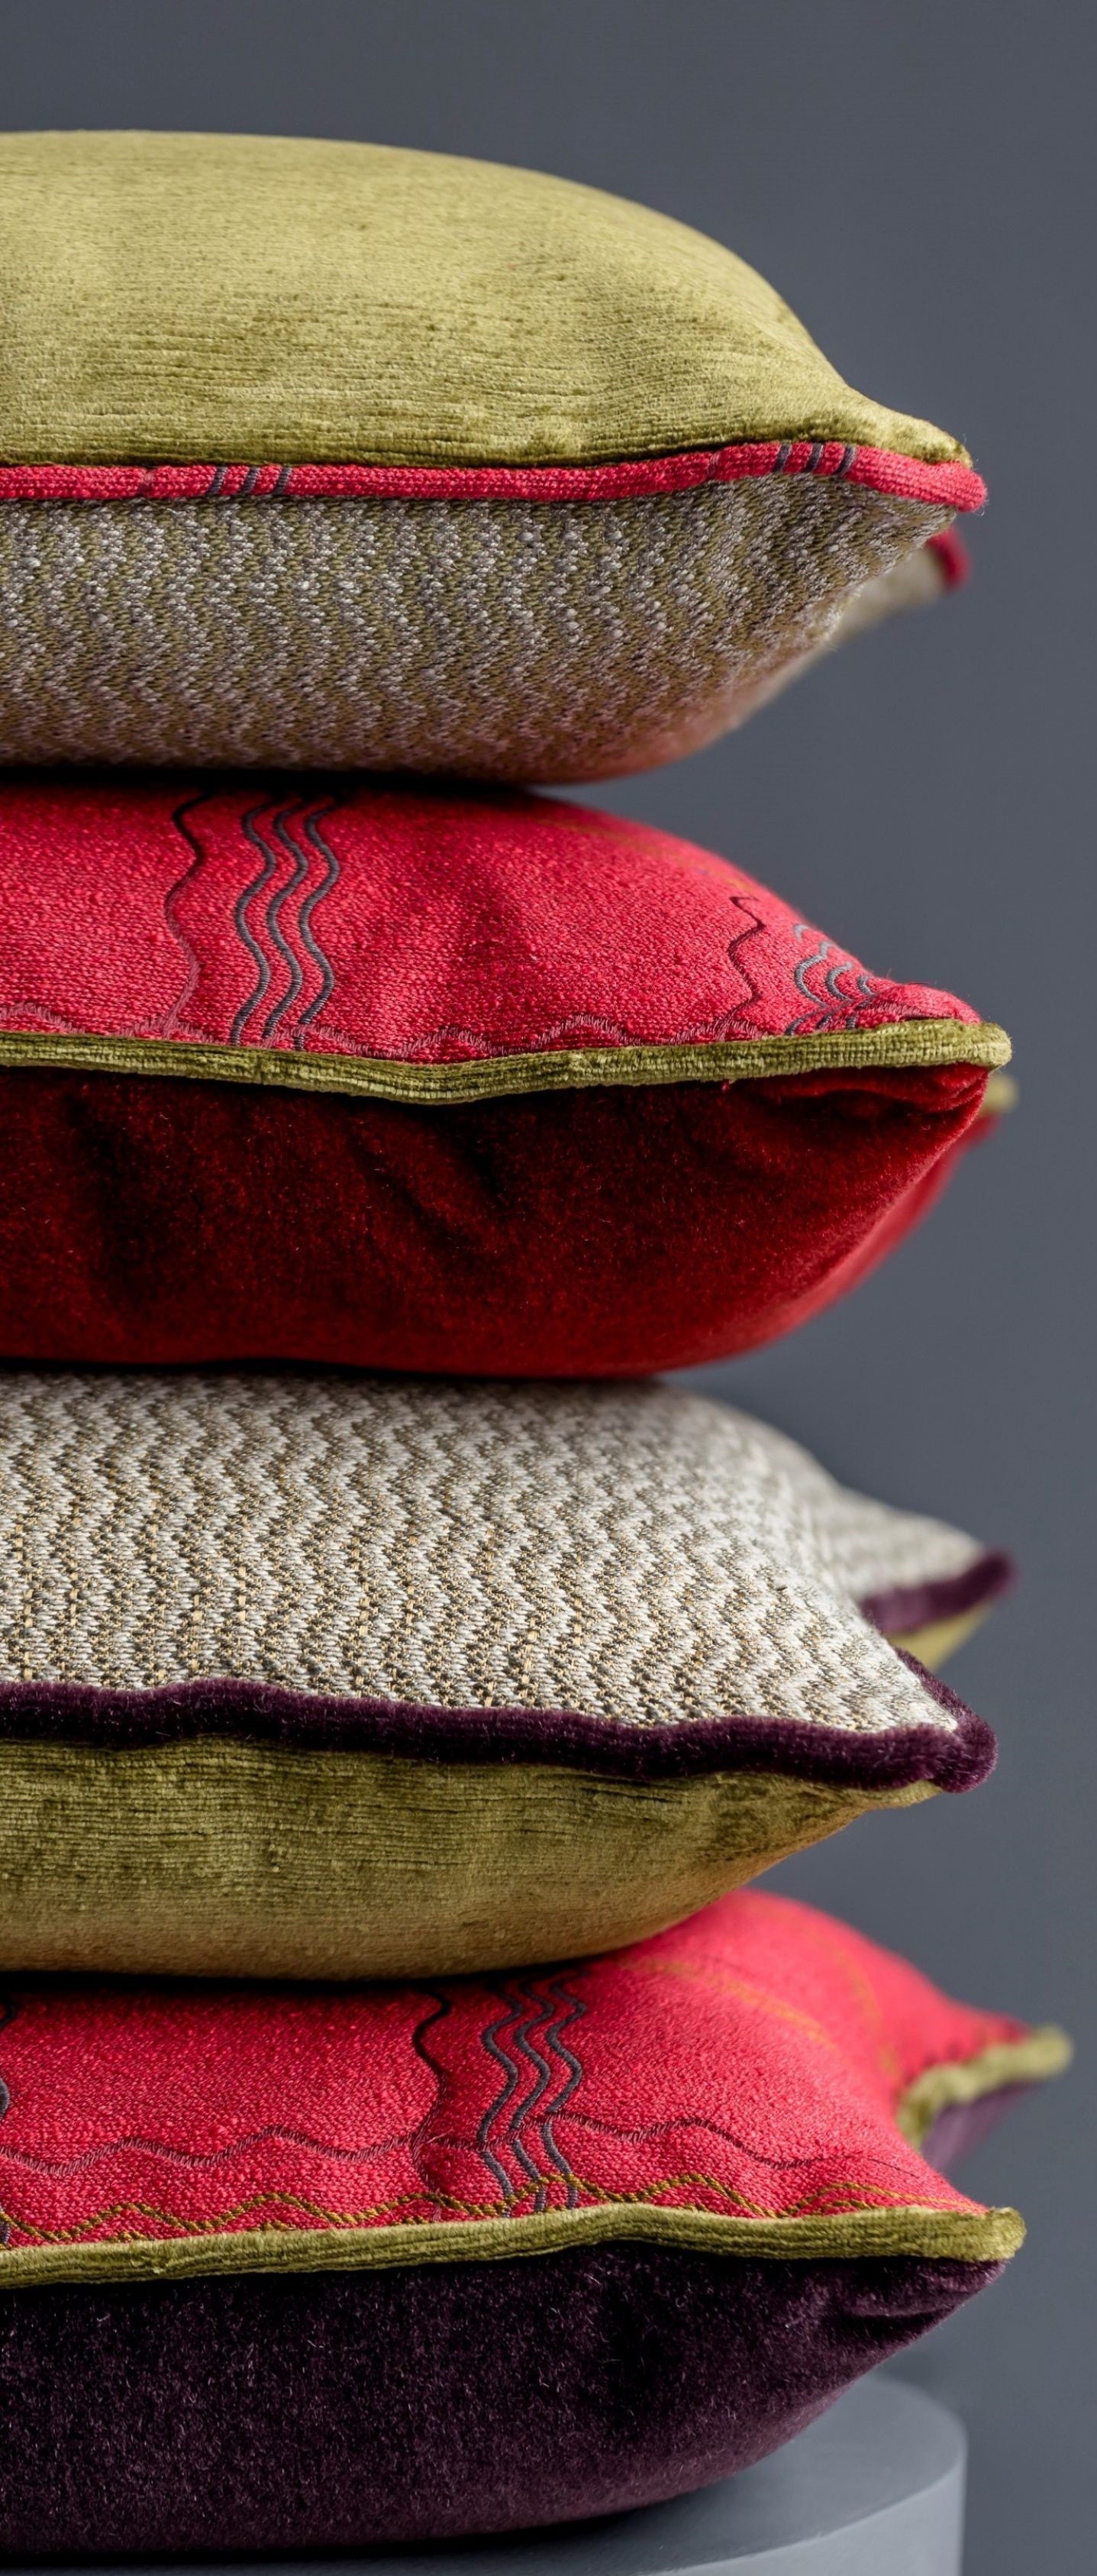 Jacquard fabric for cushions in shades of gold, red and beige, design Serena Confalonieri